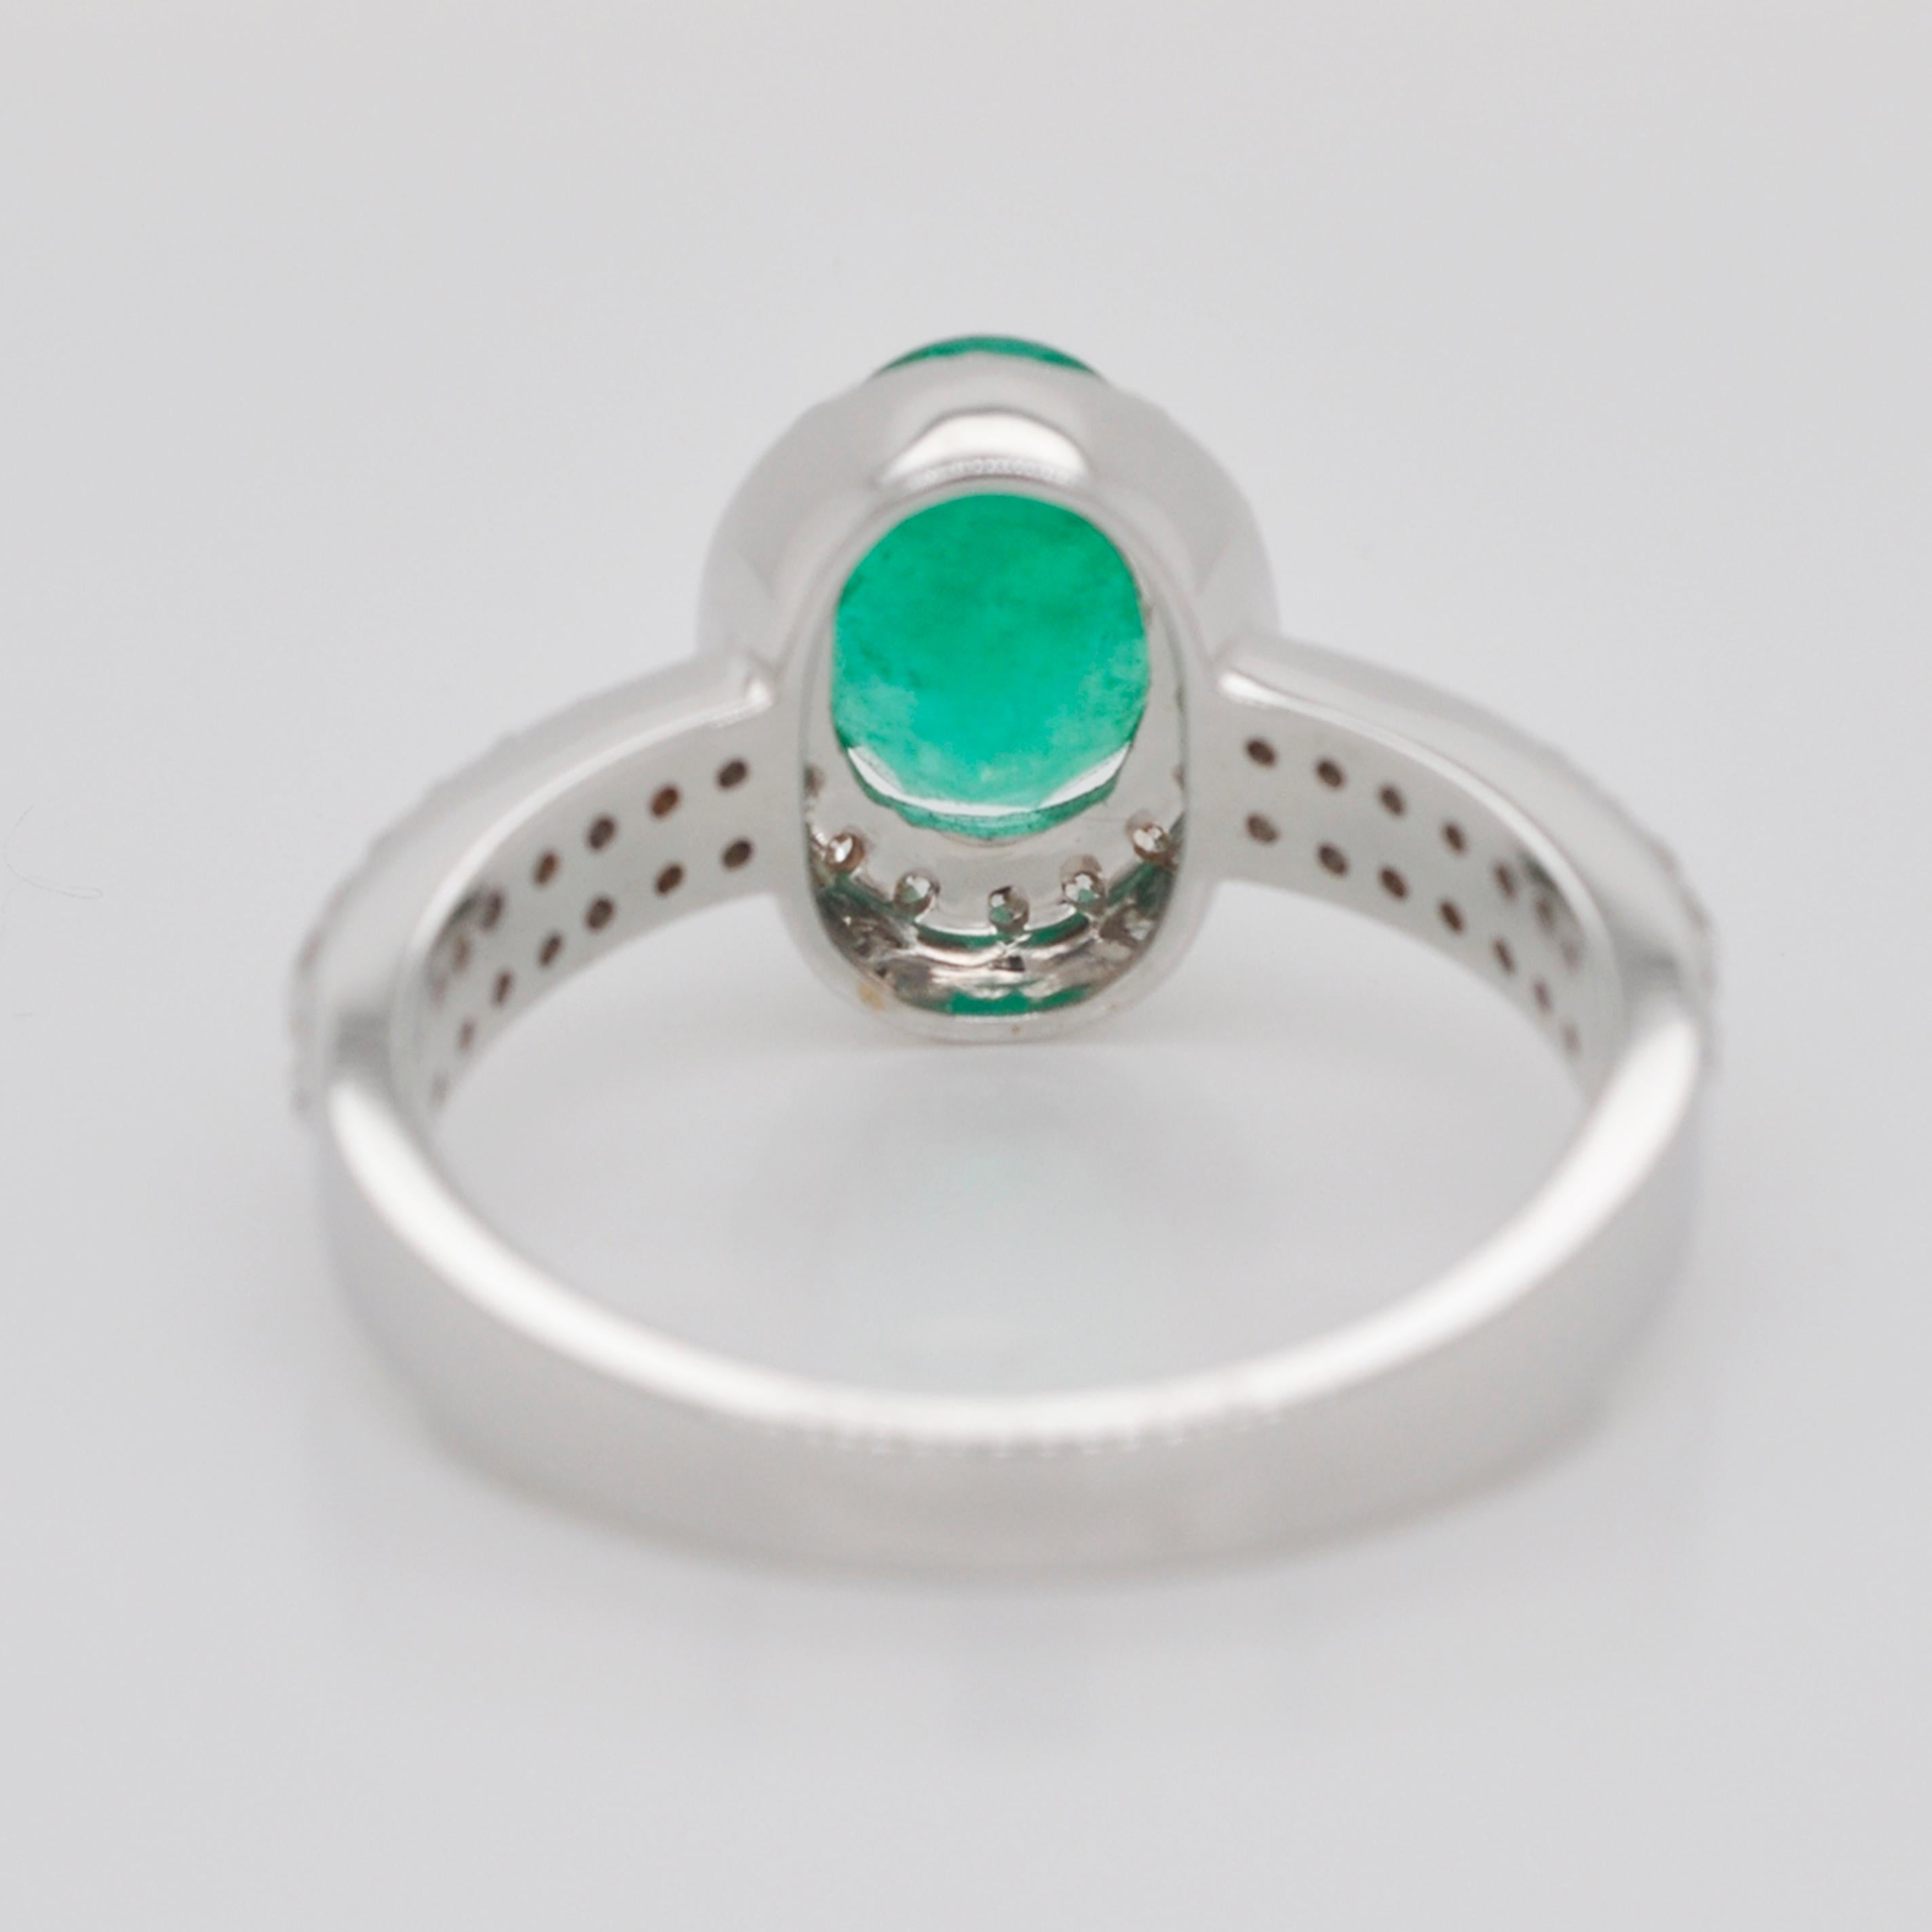 18 Karat White Gold 8.4x6.4 mm Oval Colombian Emerald Diamond Contemporary Ring For Sale 11